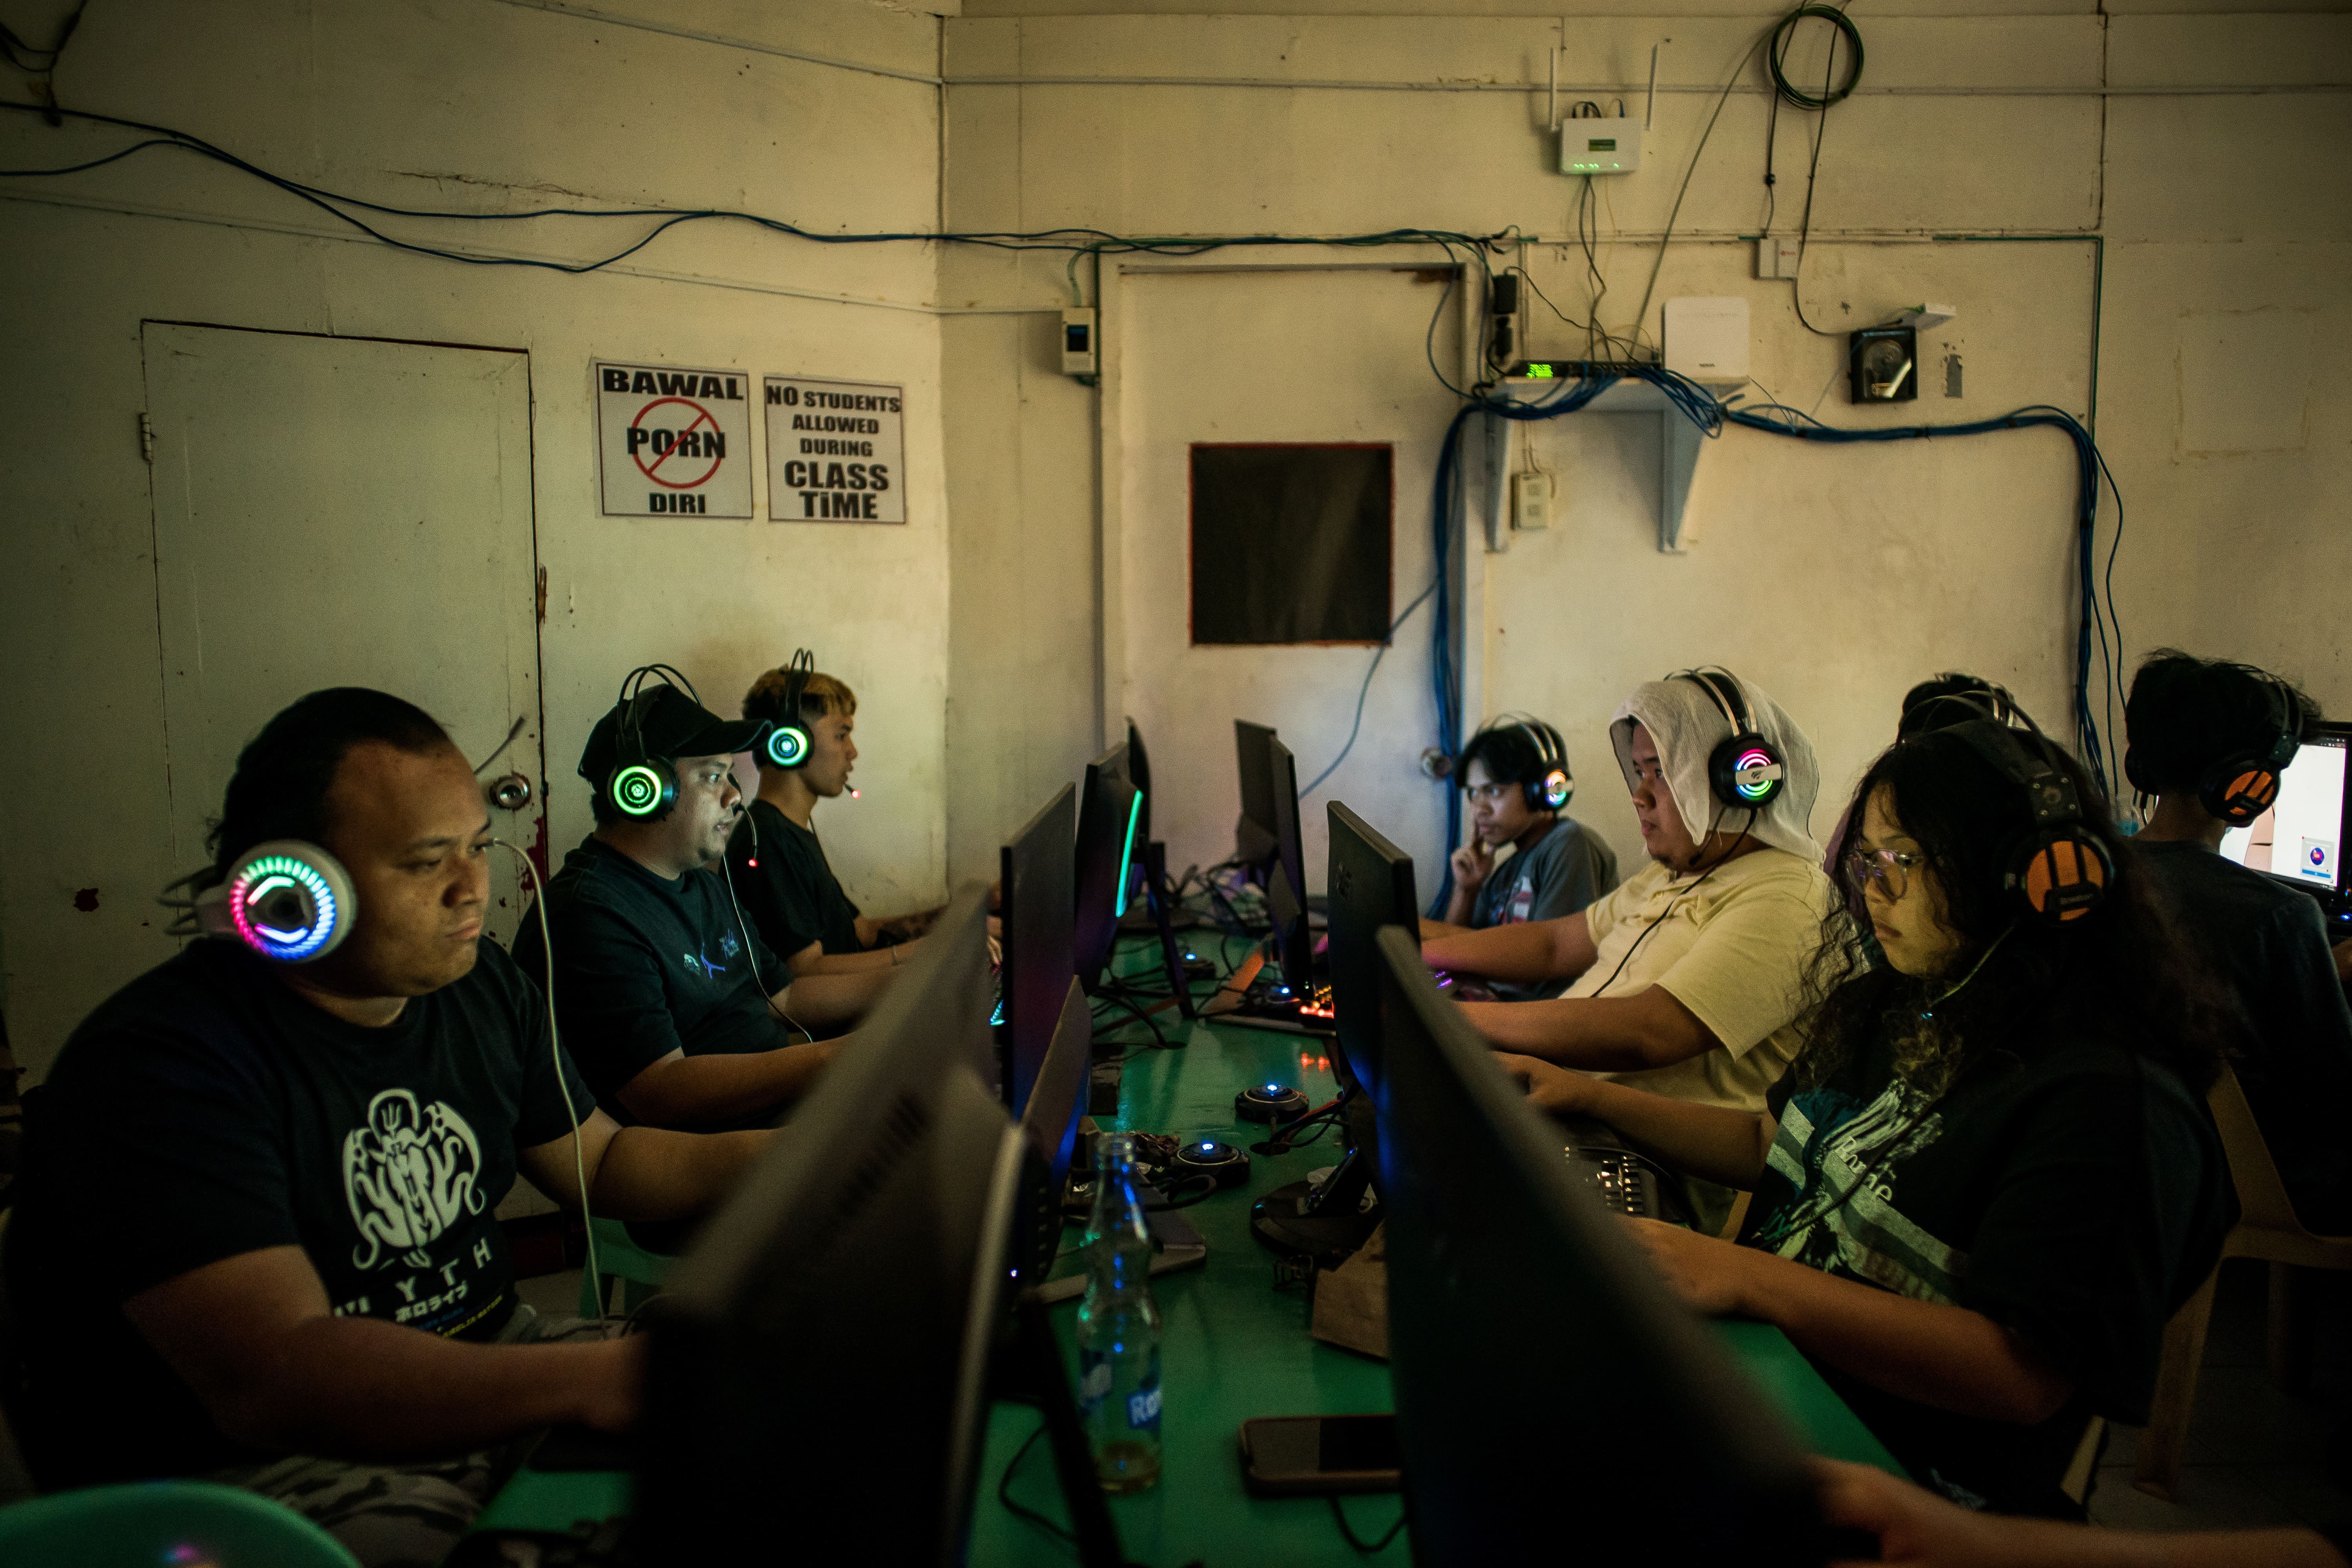 Internet cafes in the Philippines are now frequented by workers who sort and label data for artificial intelligence models